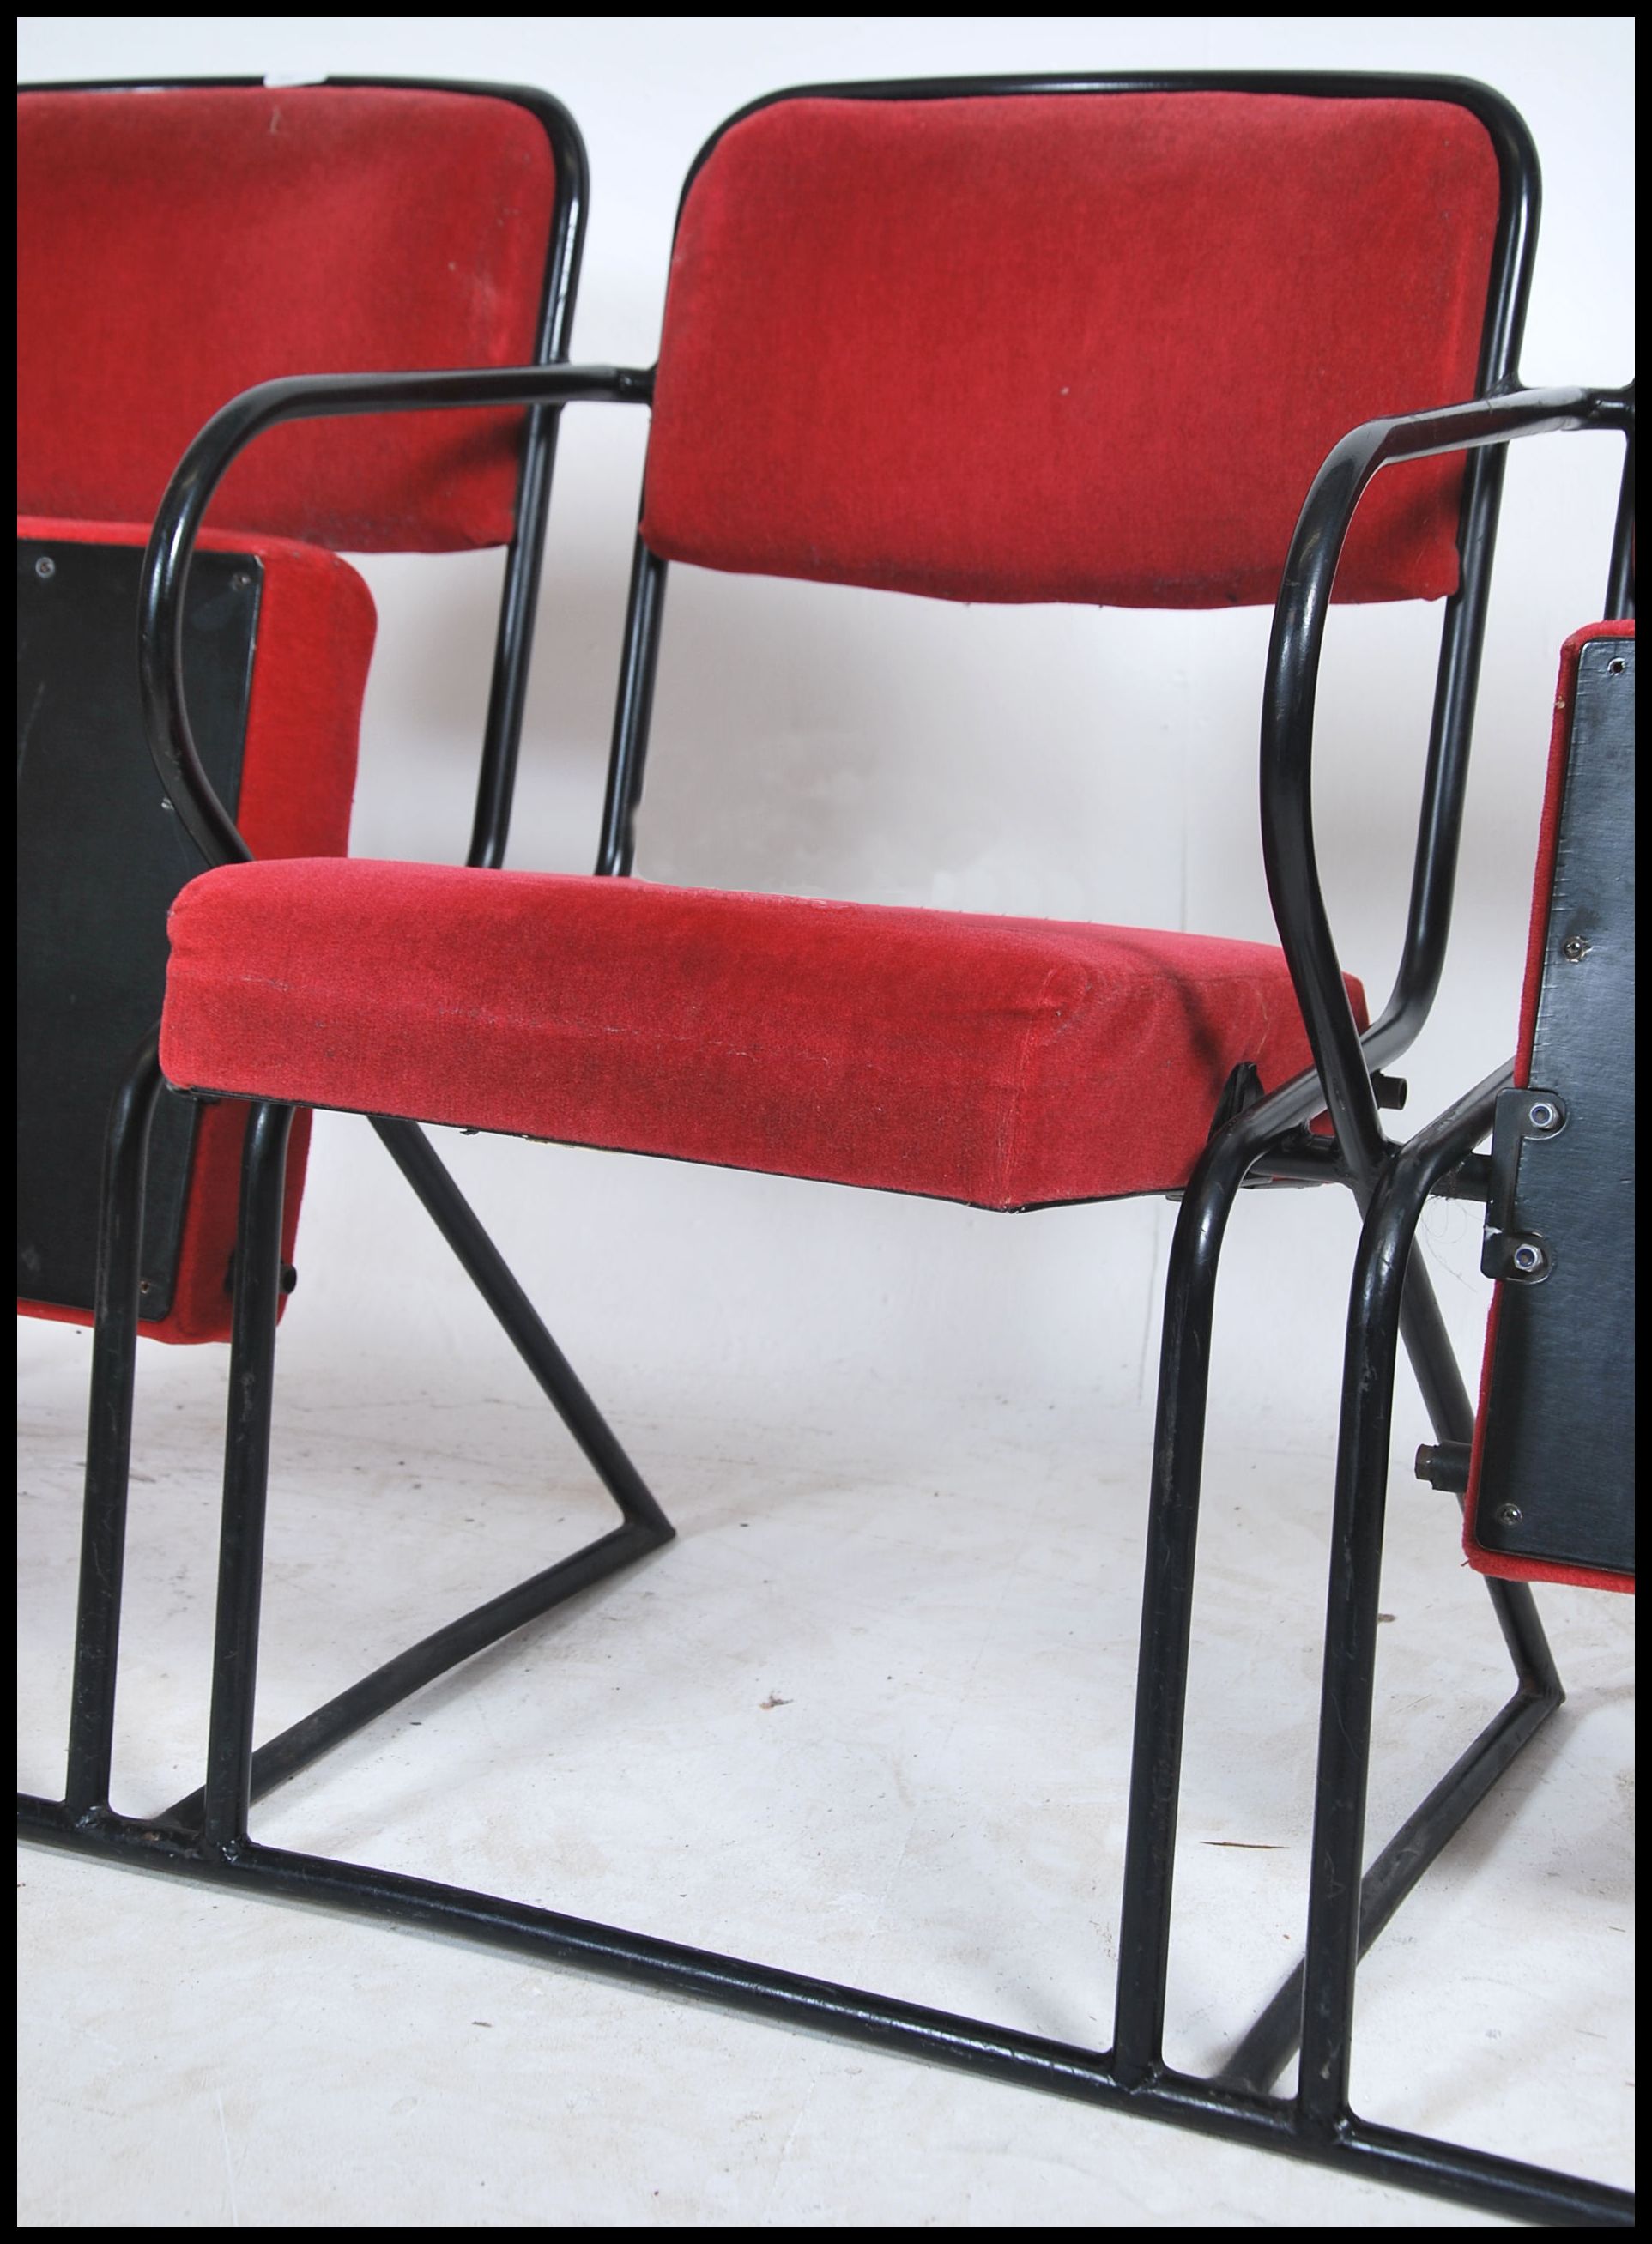 A set of 4 - run of 4 retro 20th century folding cinema chairs upholstered in red moquette fabric - Image 3 of 4